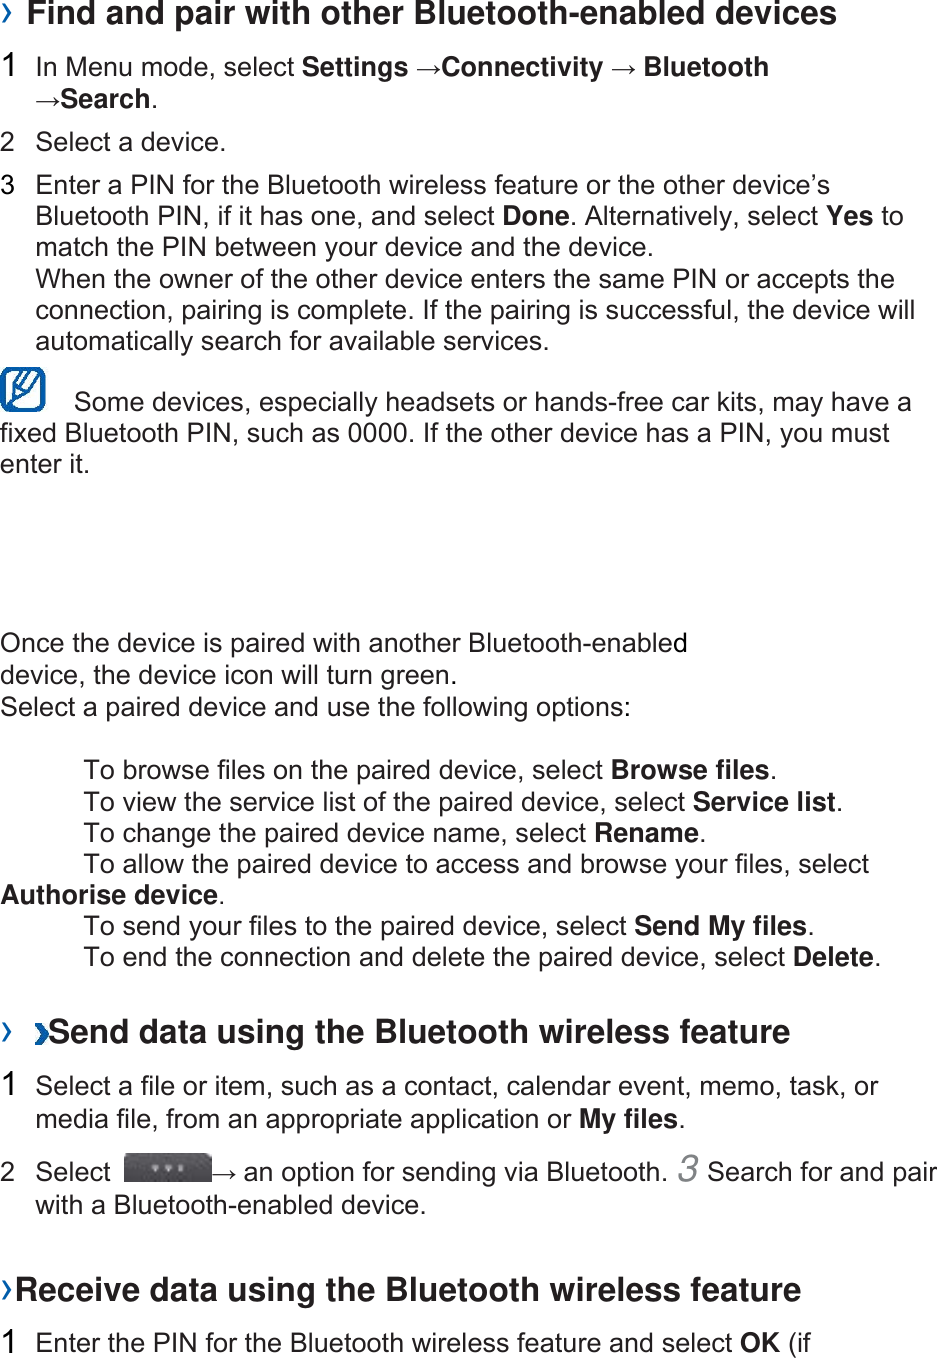  › Find and pair with other Bluetooth-enabled devices   1  In Menu mode, select Settings →Connectivity → Bluetooth →Search.  2  Select a device.   3  Enter a PIN for the Bluetooth wireless feature or the other device’s Bluetooth PIN, if it has one, and select Done. Alternatively, select Yes to match the PIN between your device and the device.   When the owner of the other device enters the same PIN or accepts the connection, pairing is complete. If the pairing is successful, the device will automatically search for available services.     Some devices, especially headsets or hands-free car kits, may have a fixed Bluetooth PIN, such as 0000. If the other device has a PIN, you must enter it.   Once the device is paired with another Bluetooth-enabled device, the device icon will turn green. Select a paired device and use the following options:    To browse files on the paired device, select Browse files.    To view the service list of the paired device, select Service list.    To change the paired device name, select Rename.   To allow the paired device to access and browse your files, select Authorise device.    To send your files to the paired device, select Send My files.    To end the connection and delete the paired device, select Delete.   ›  Send data using the Bluetooth wireless feature   1  Select a file or item, such as a contact, calendar event, memo, task, or media file, from an appropriate application or My files.  2 Select  → an option for sending via Bluetooth. 3 Search for and pair with a Bluetooth-enabled device.   ›Receive data using the Bluetooth wireless feature   1  Enter the PIN for the Bluetooth wireless feature and select OK (if 